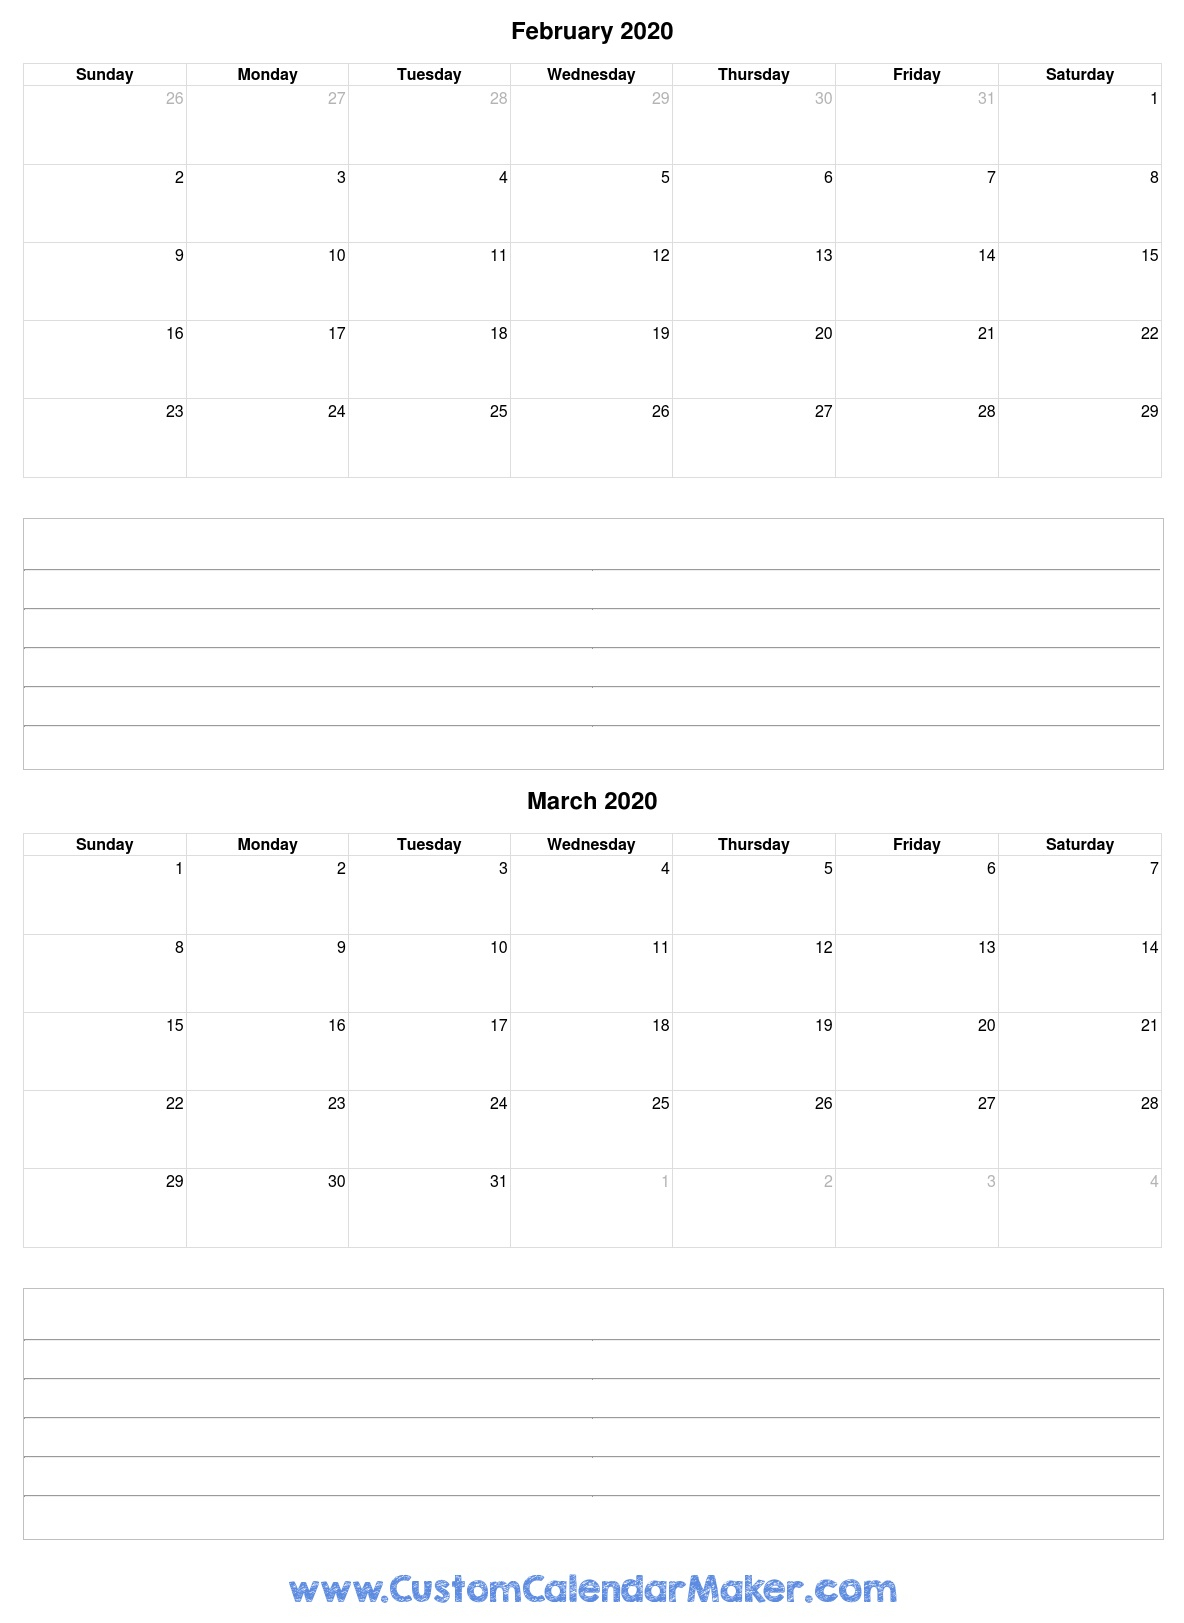 February To March 2020 Calendar Template With Notes intended for 2020 Calendar February And March